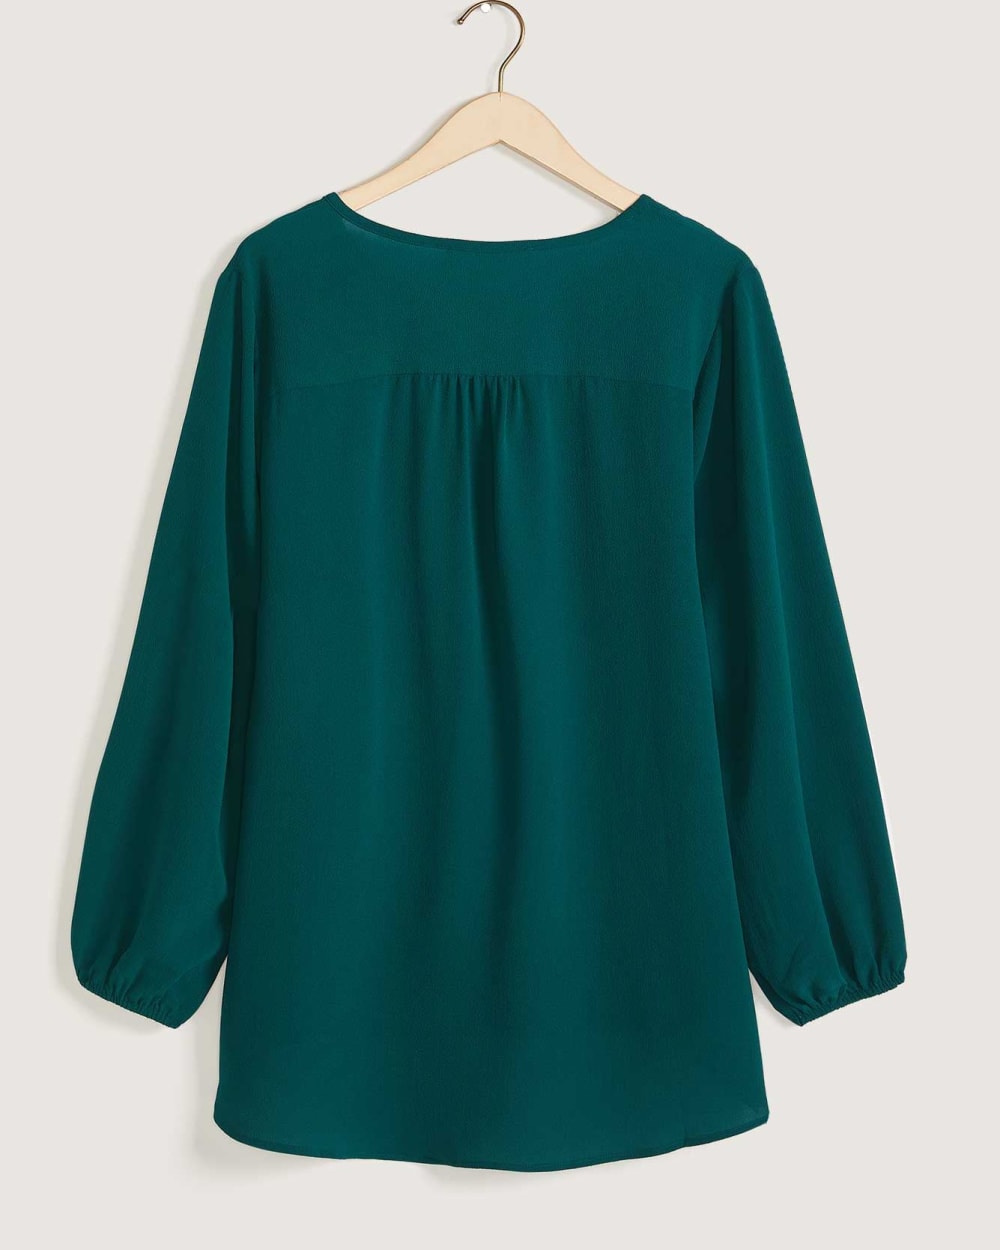 Petite, Tunic Blouse With Yoke Detail - In Every Story